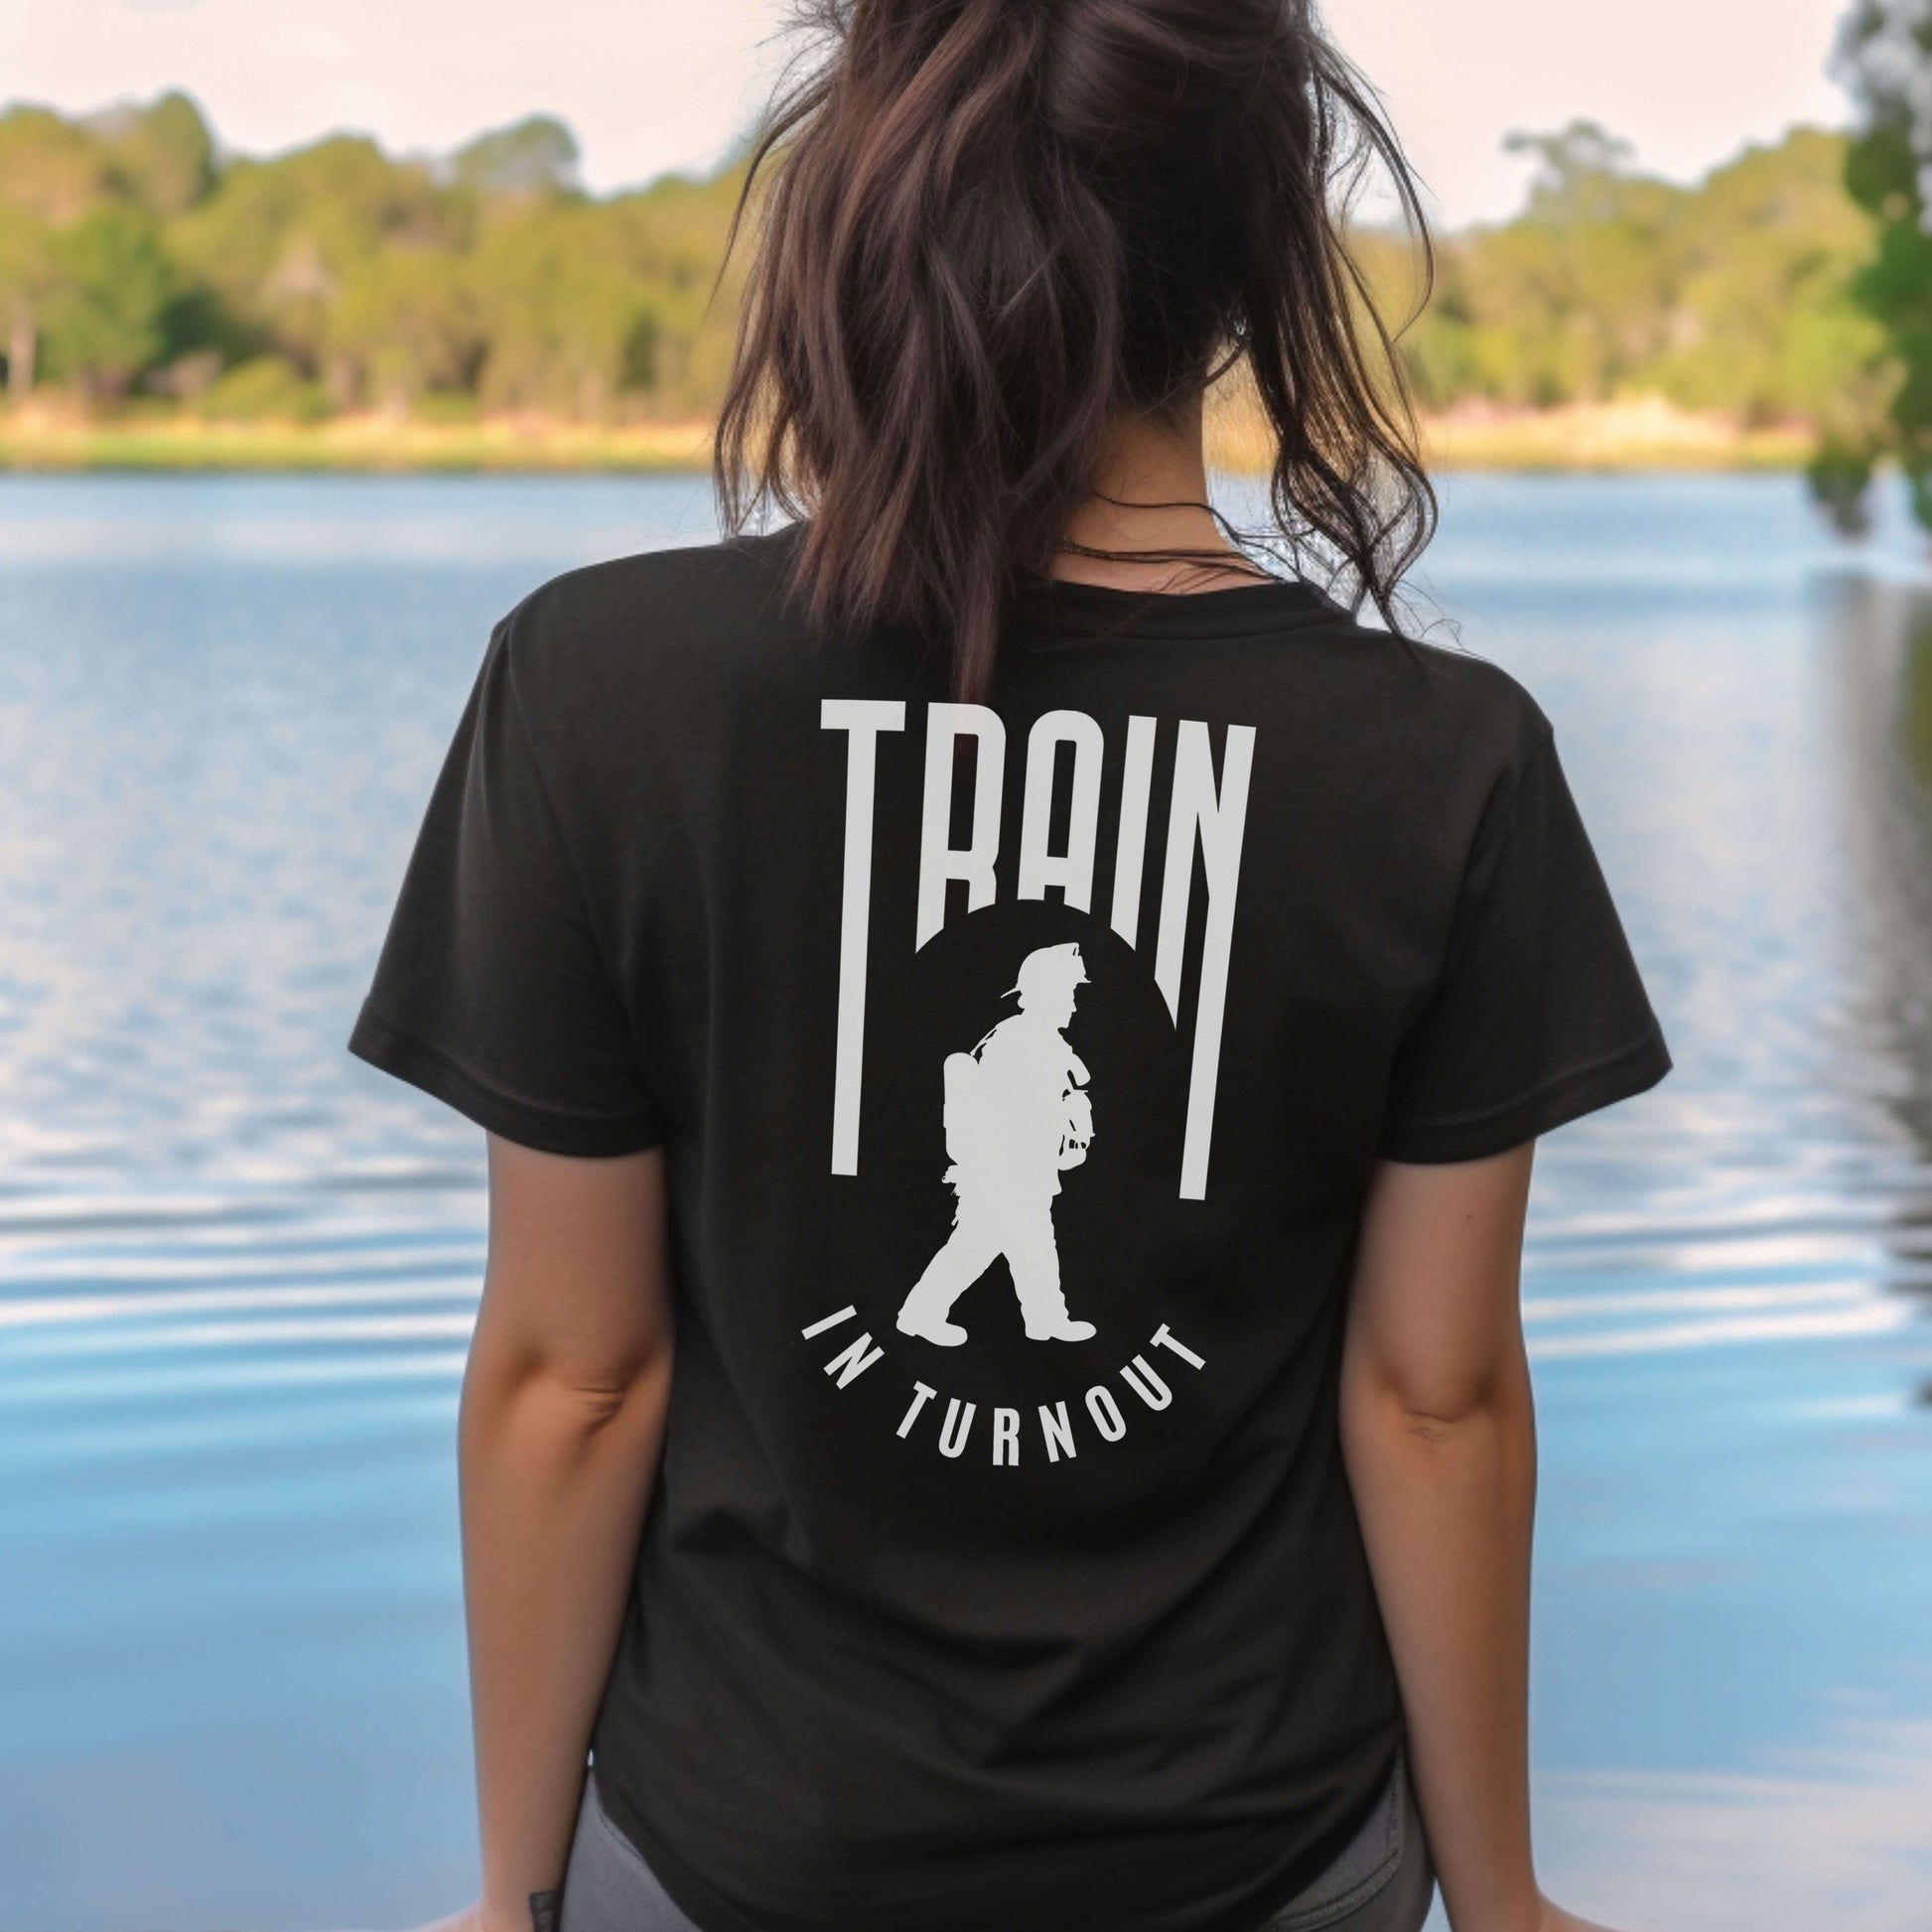 Train in Turnout Firefighter T-shirt, Black Graphic shirt for women.